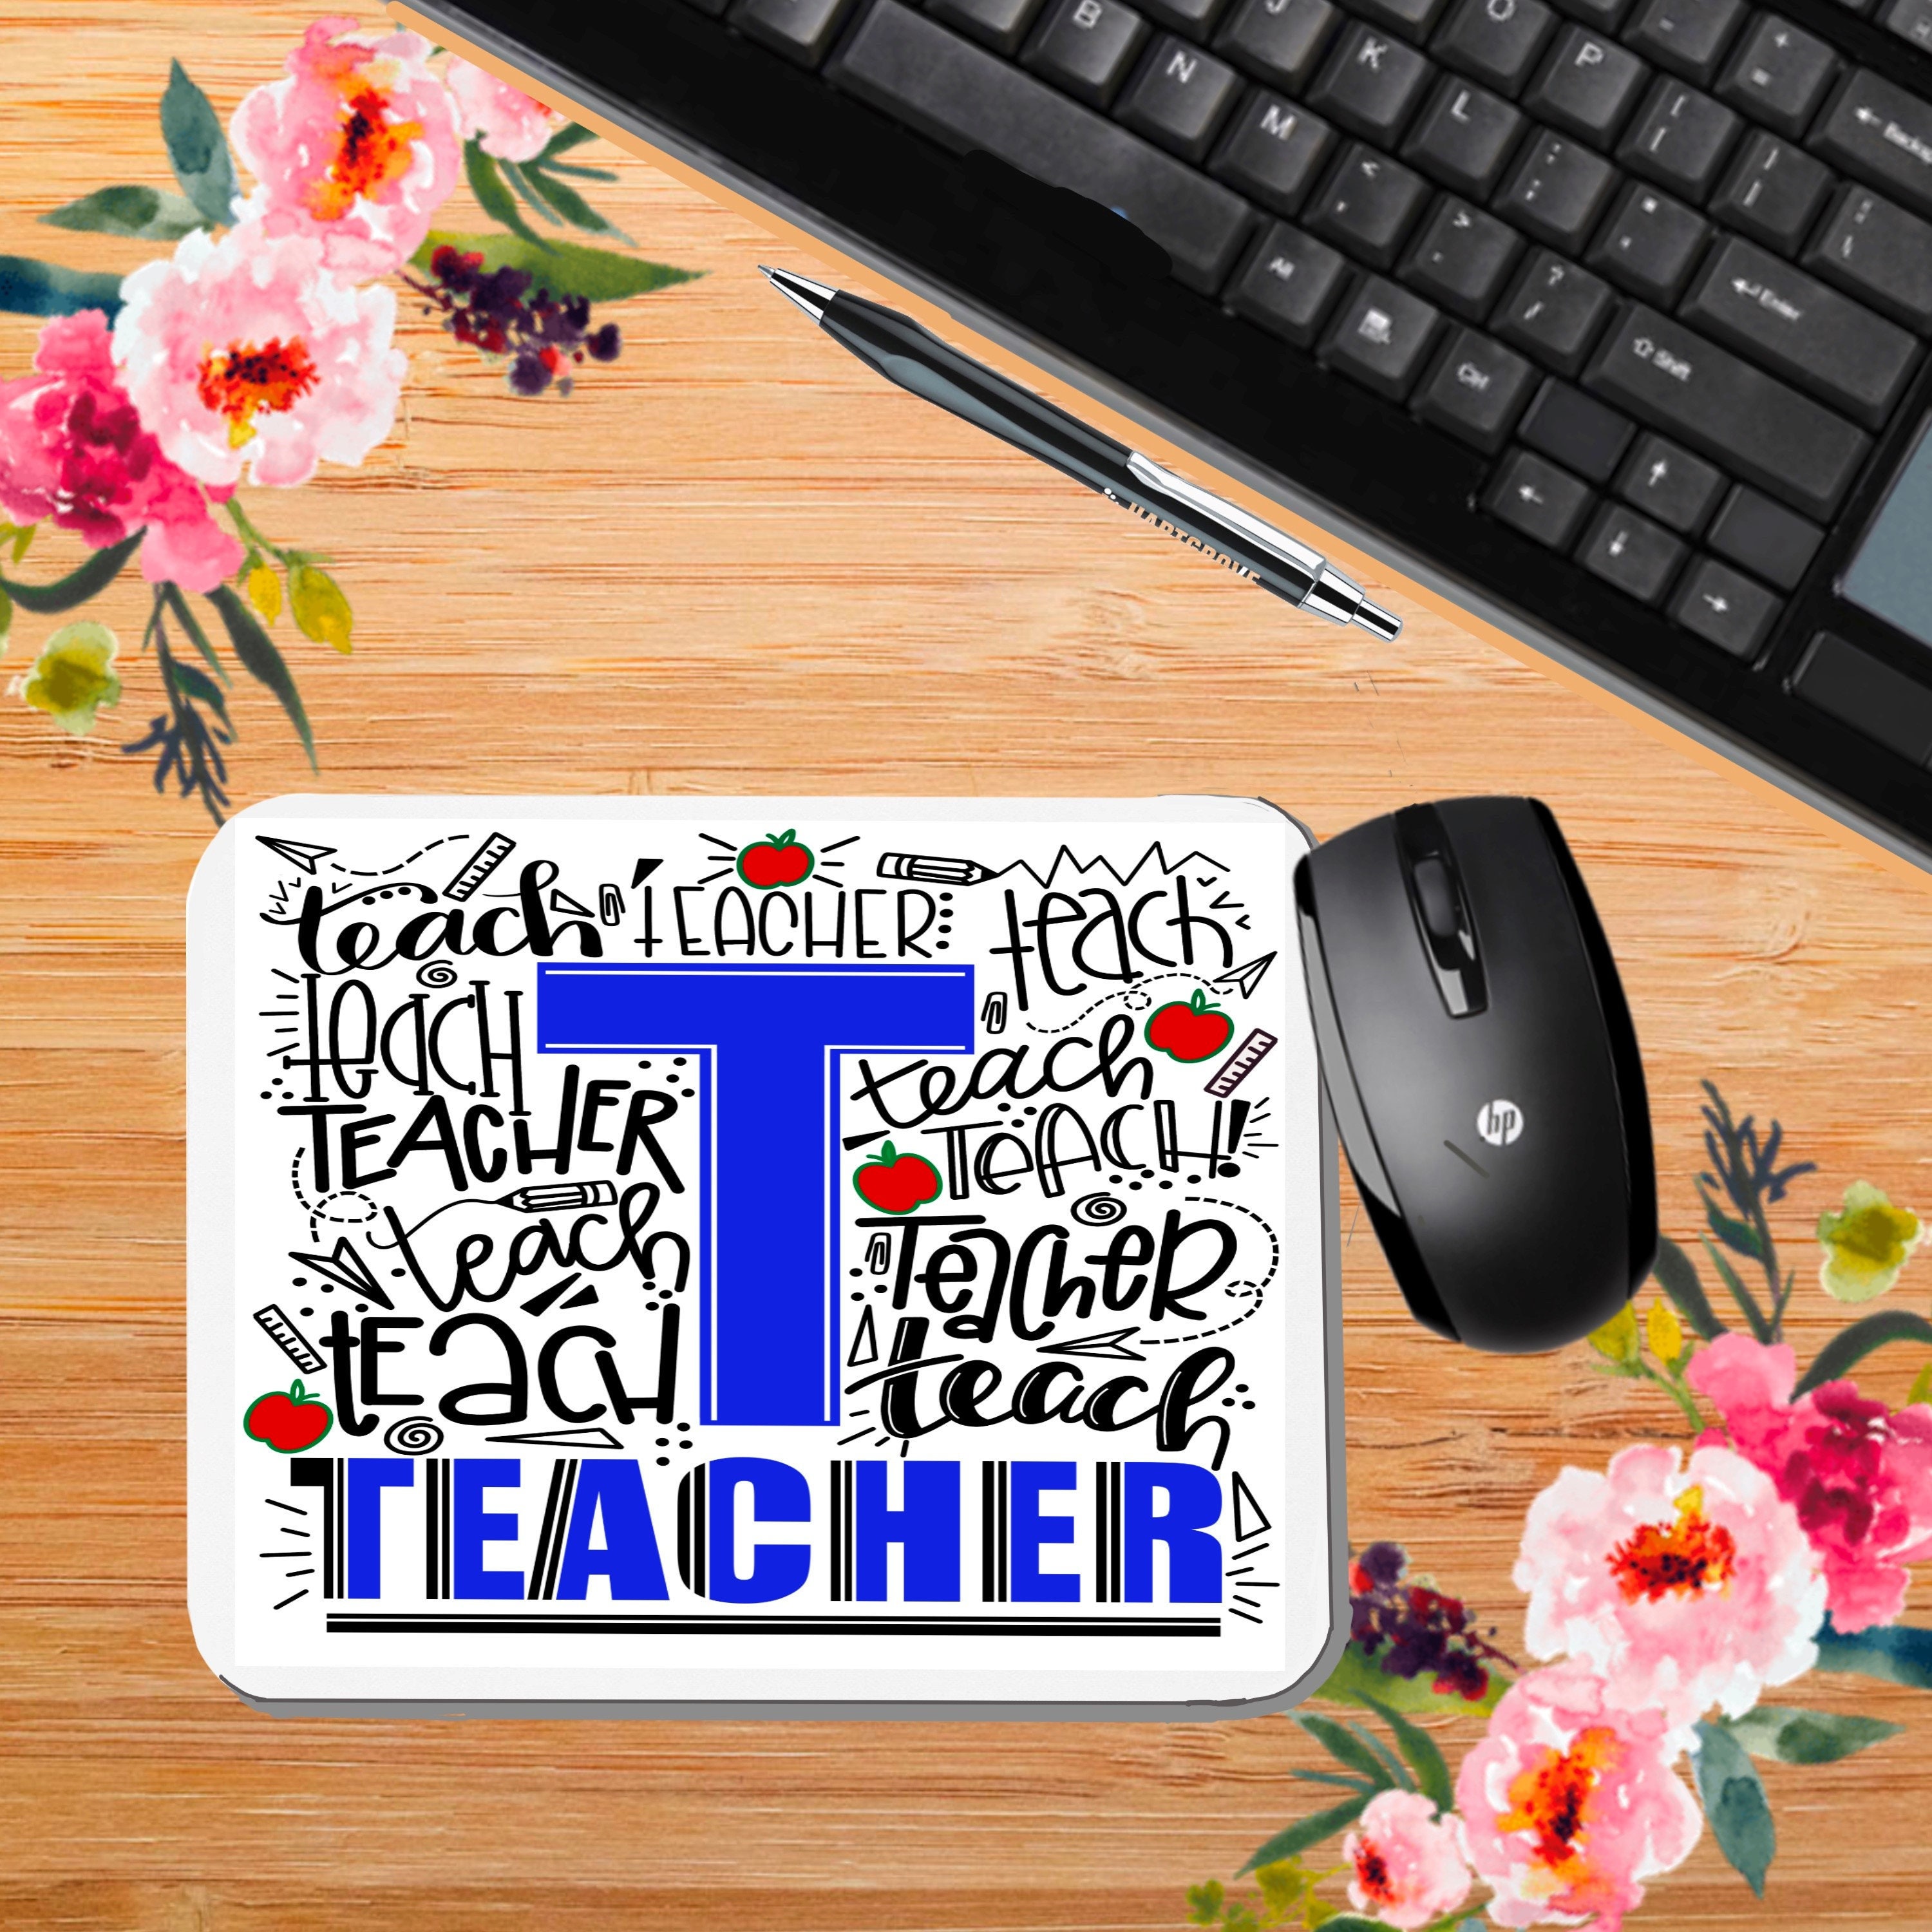 Teacher-Mouse Pad school learning birthday computer | Etsy